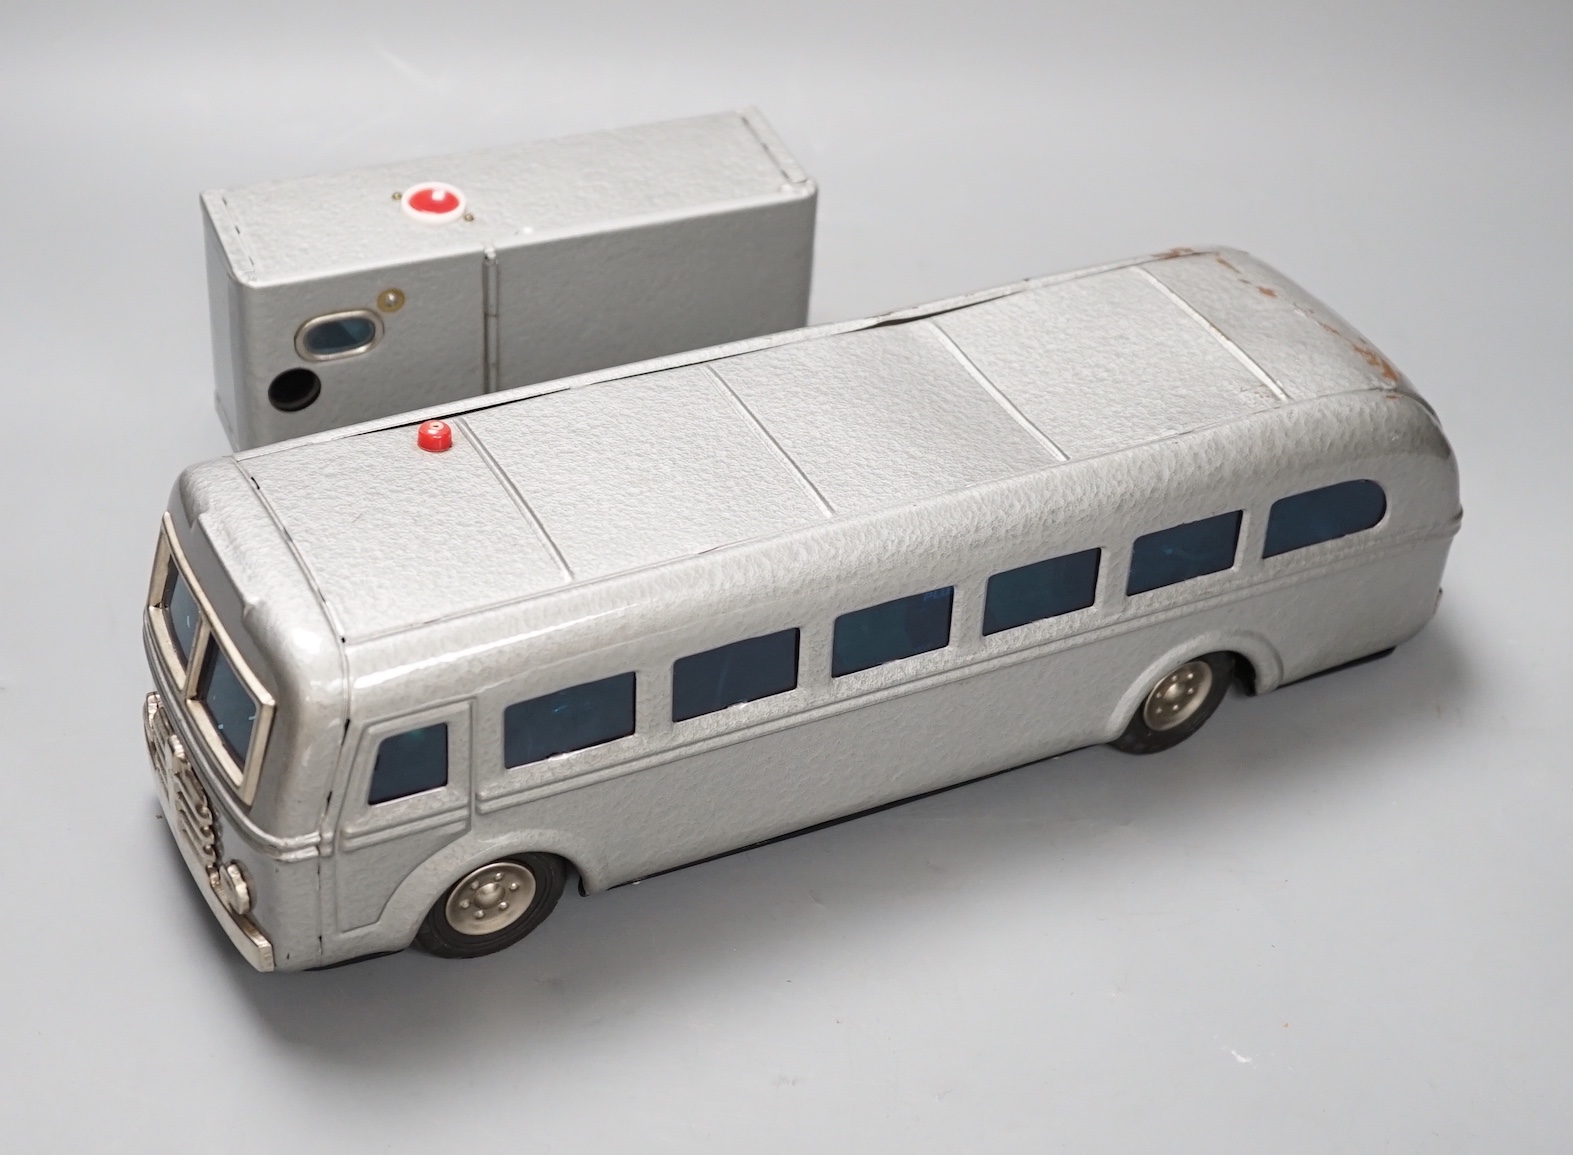 A 1950s Japanese Modern Toys Radicon radio controlled model bus, incomplete